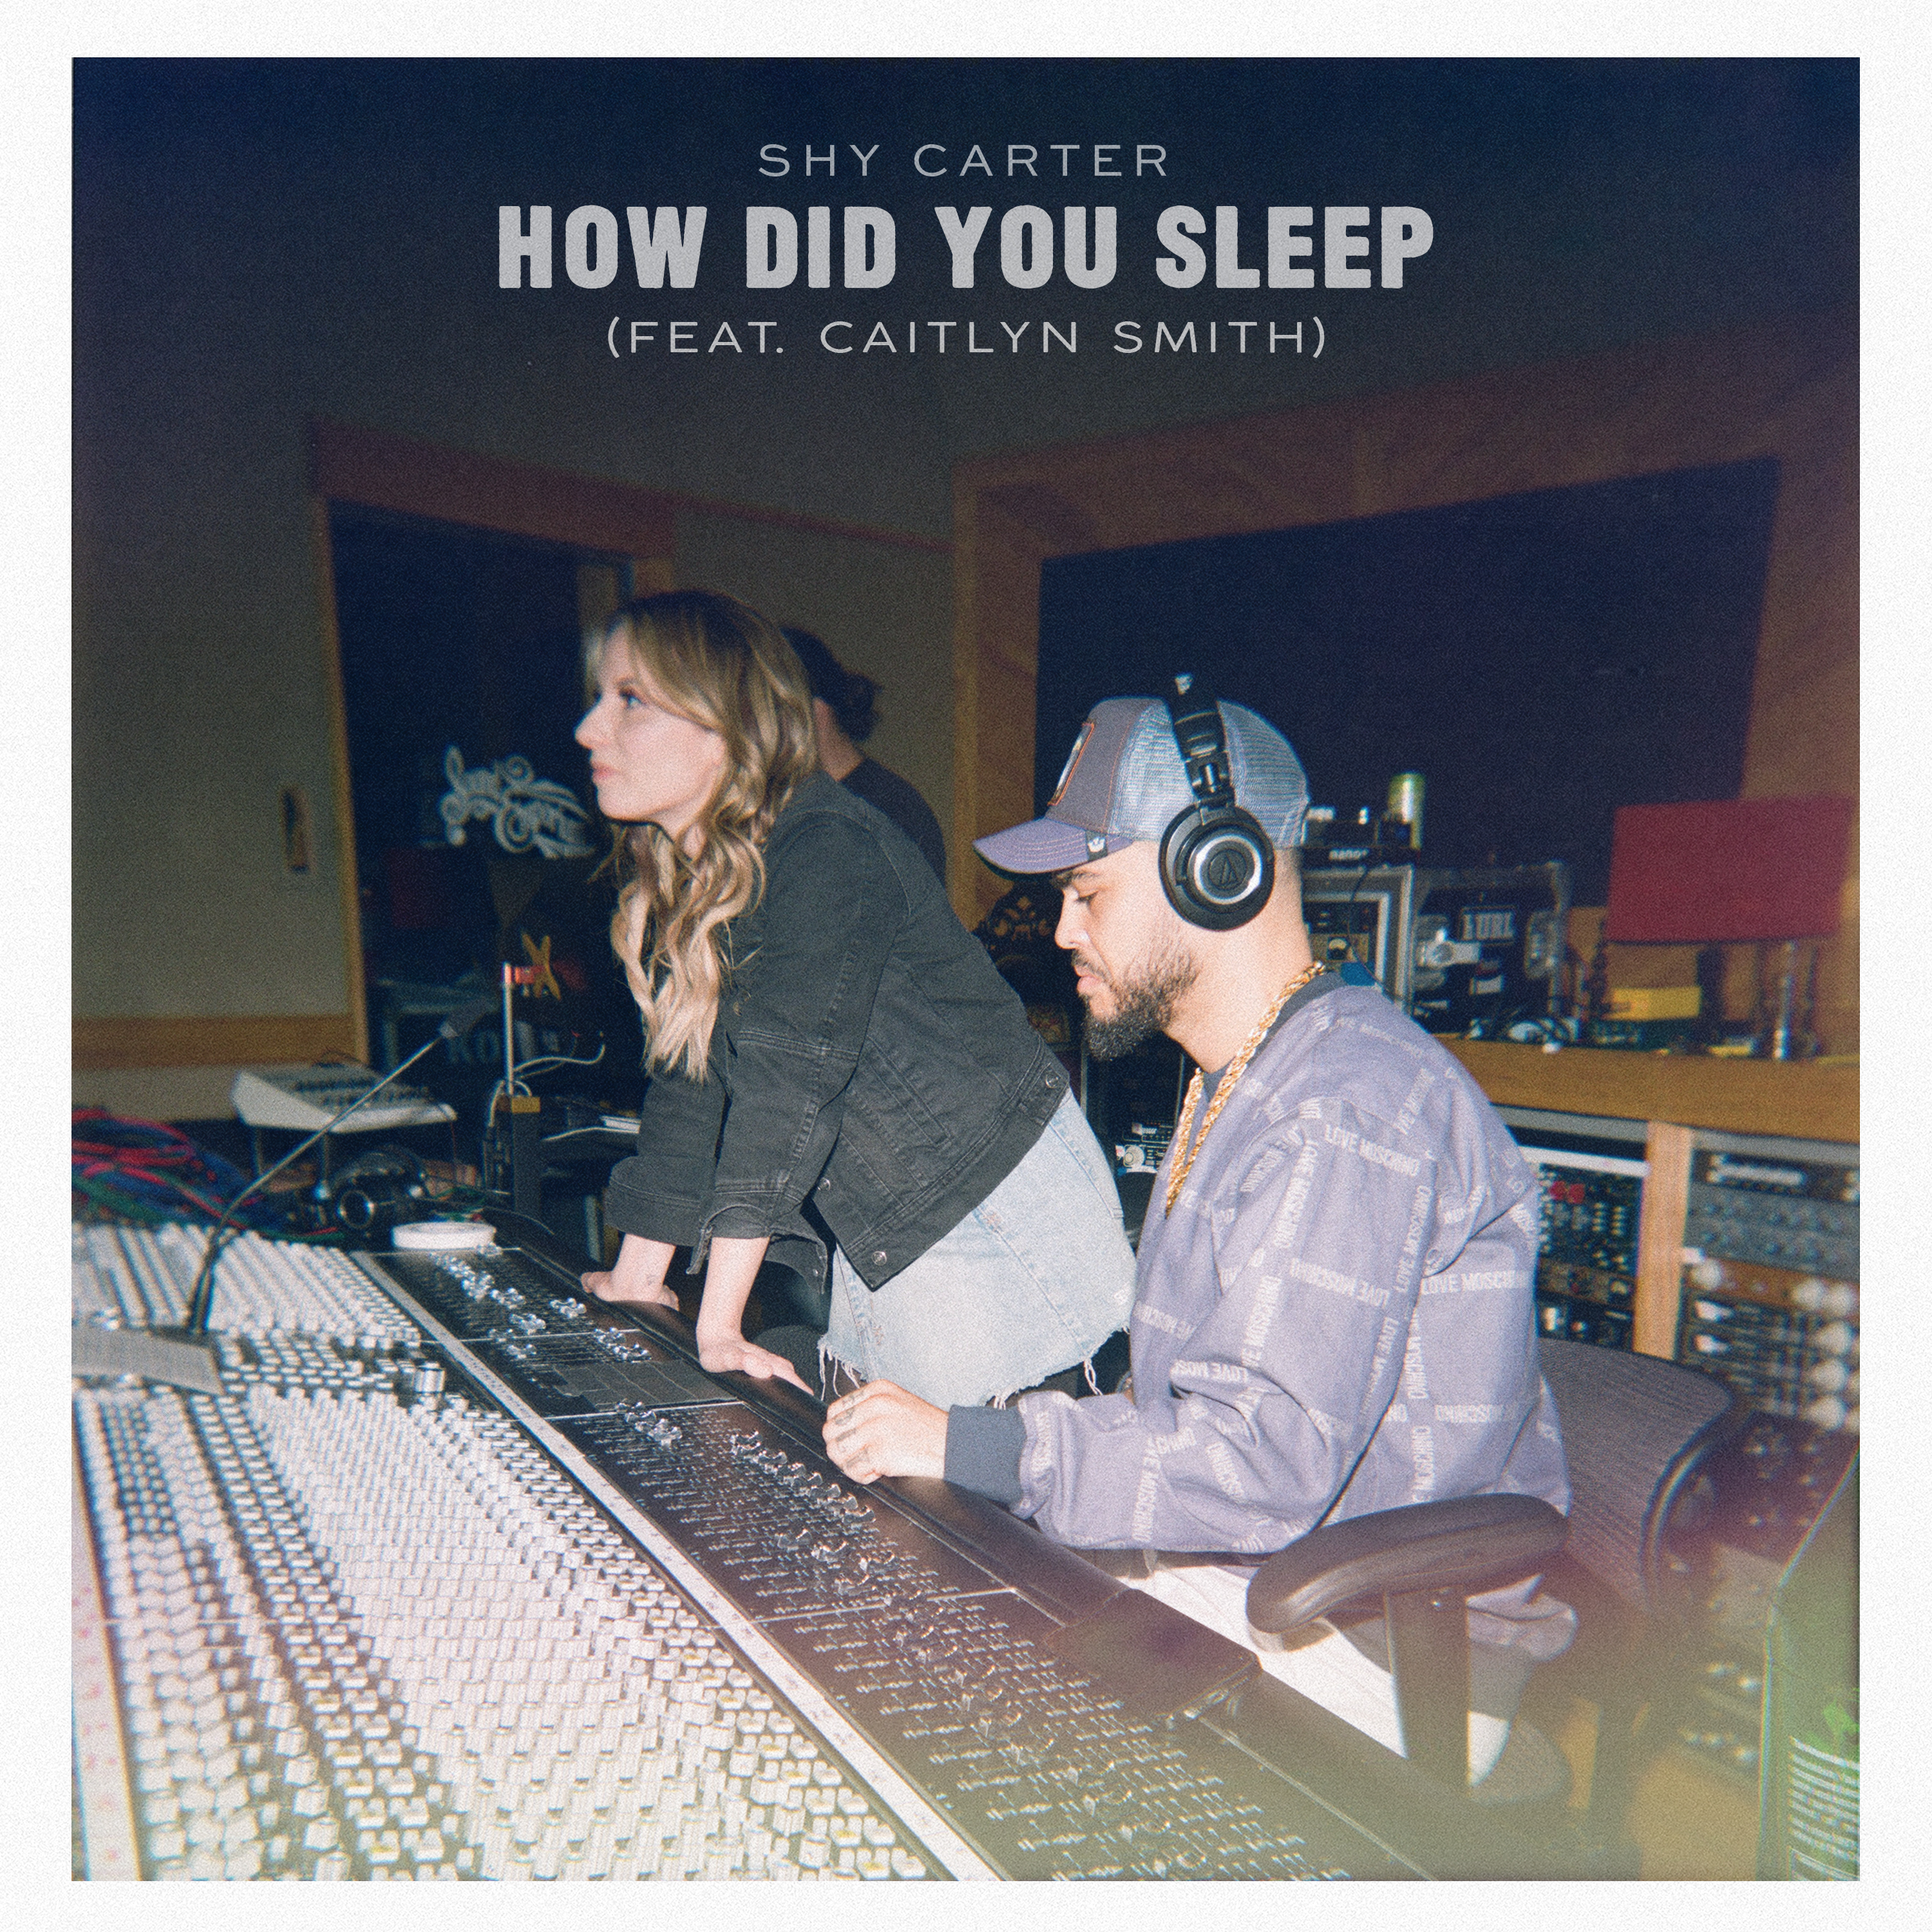 LISTEN NOW: SHY CARTER ASKS “HOW DID YOU SLEEP” IN NEW SONG FEAT. CAITLYN SMITH